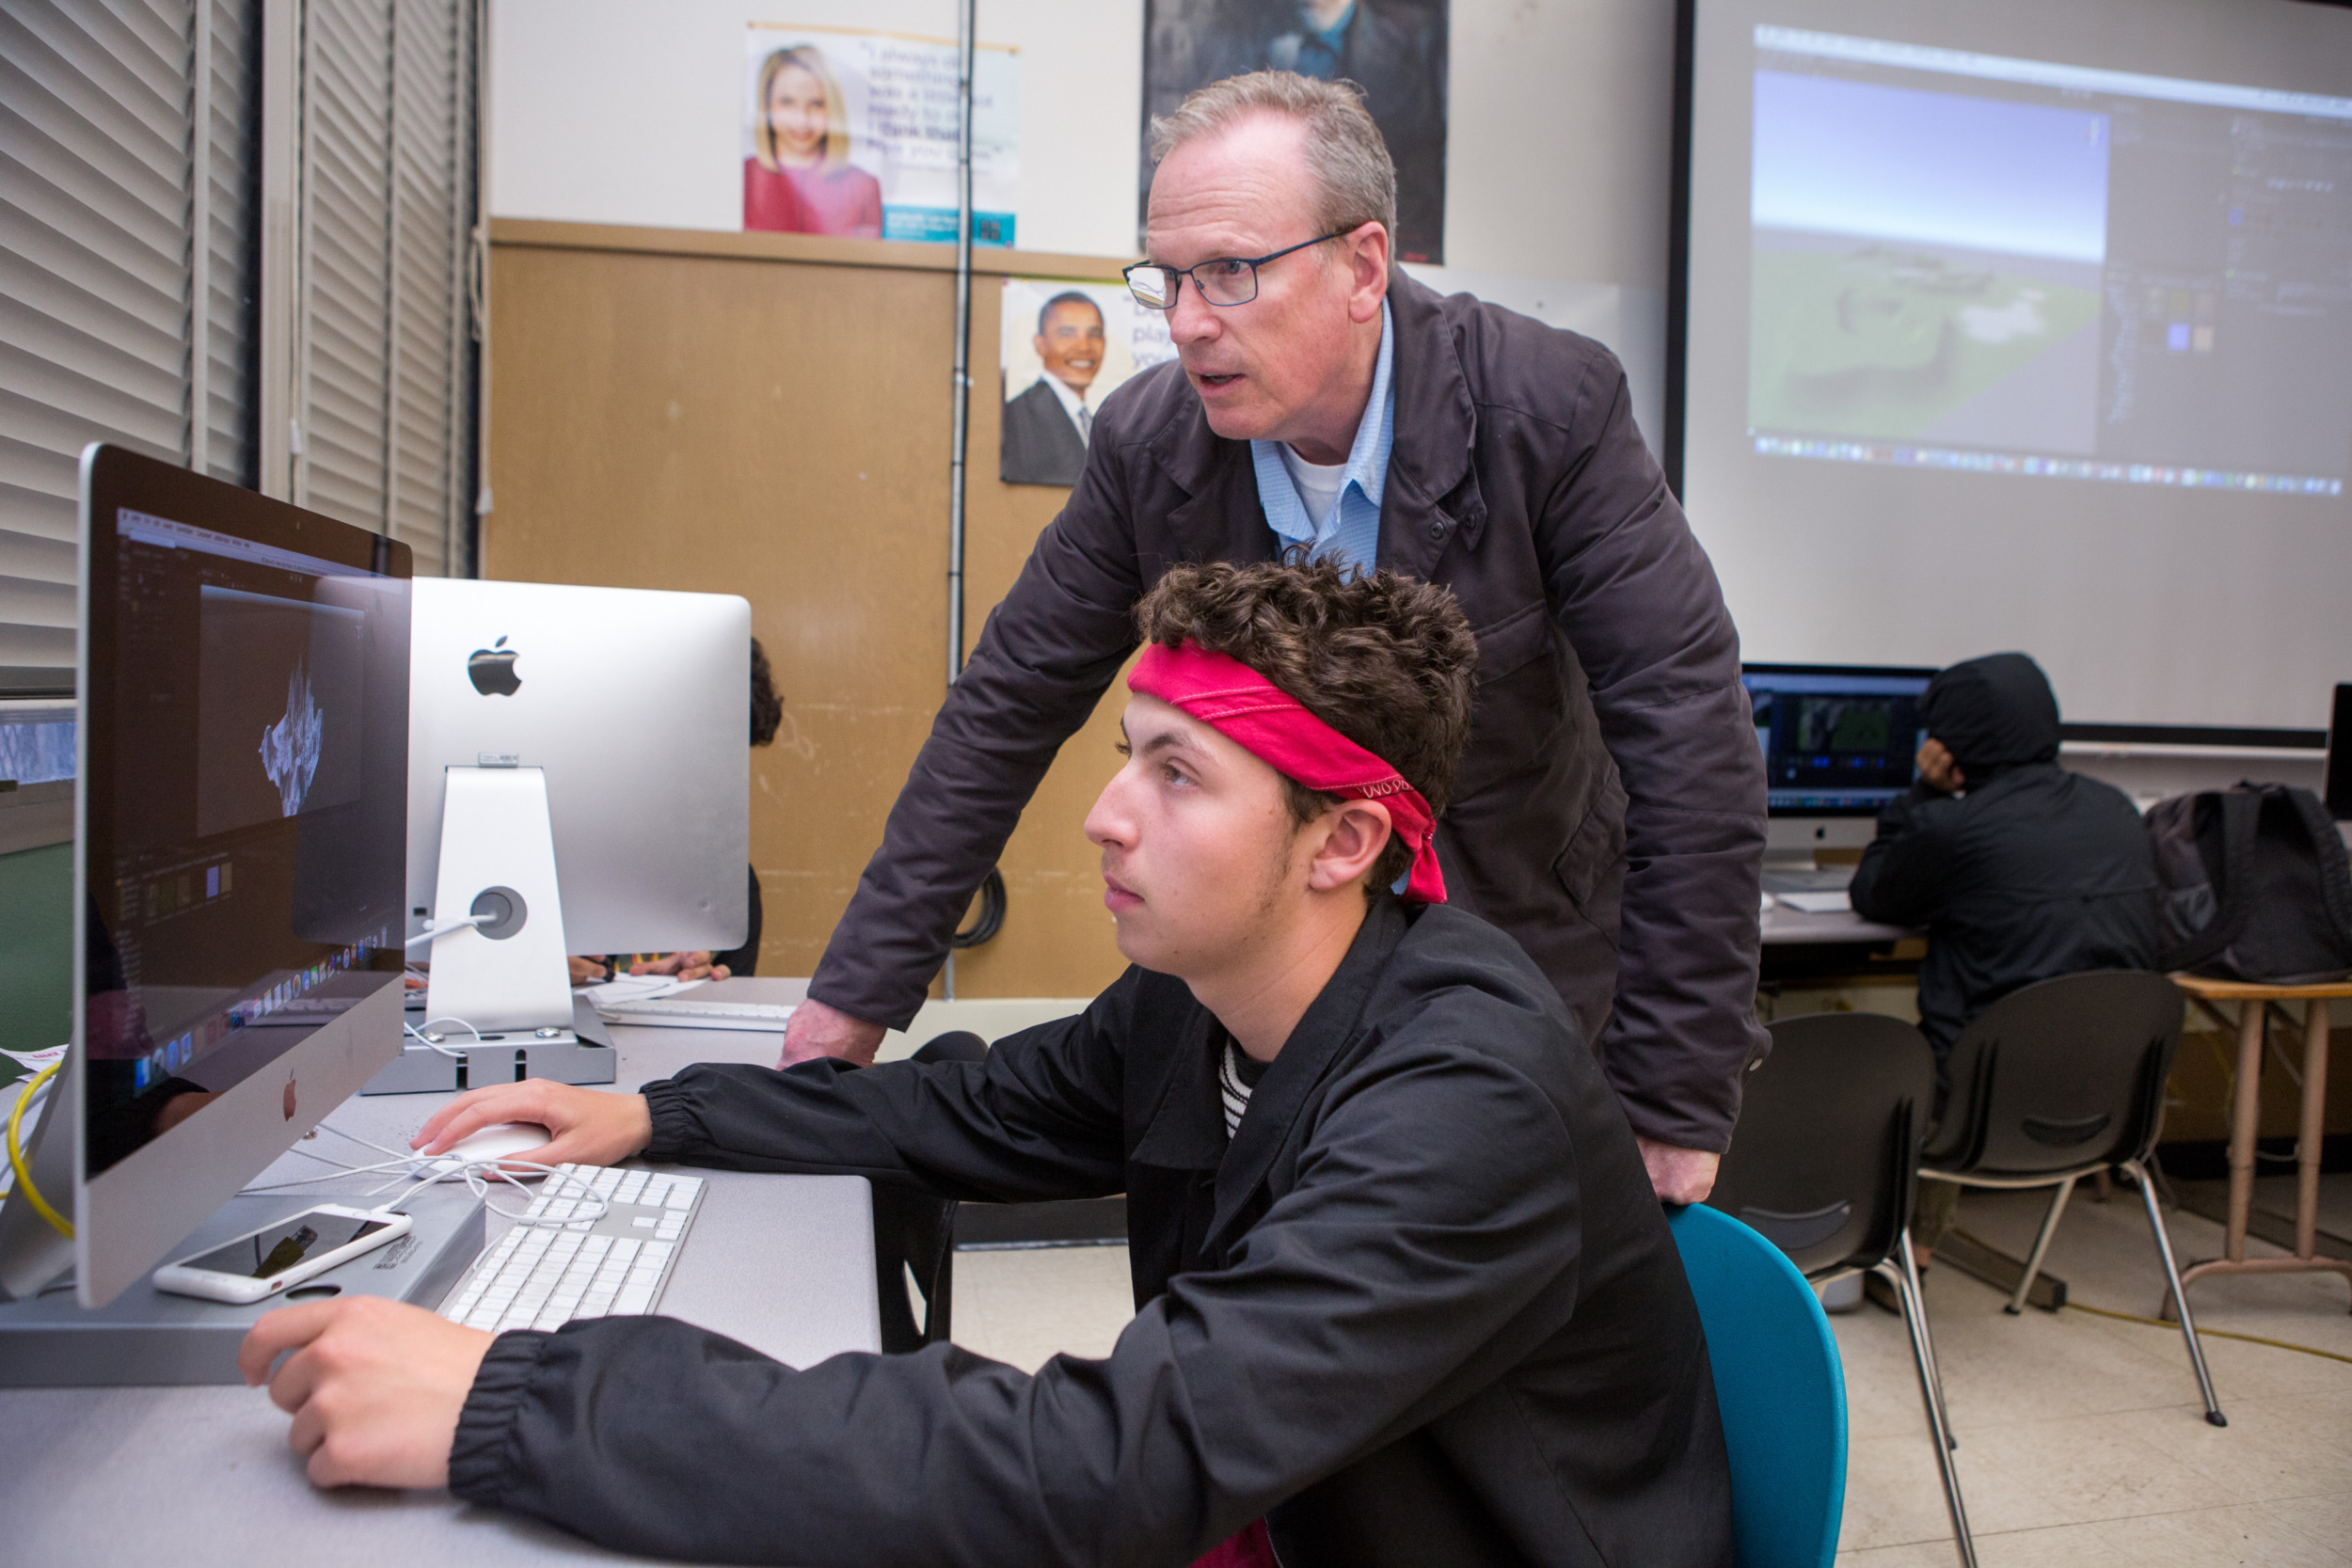 Tutoring Improves Attendance: Older gray-haired man with glasses in dark suit stands beside seated teen male student with red headband and dark jacket, both looking at large monitor in computer lab